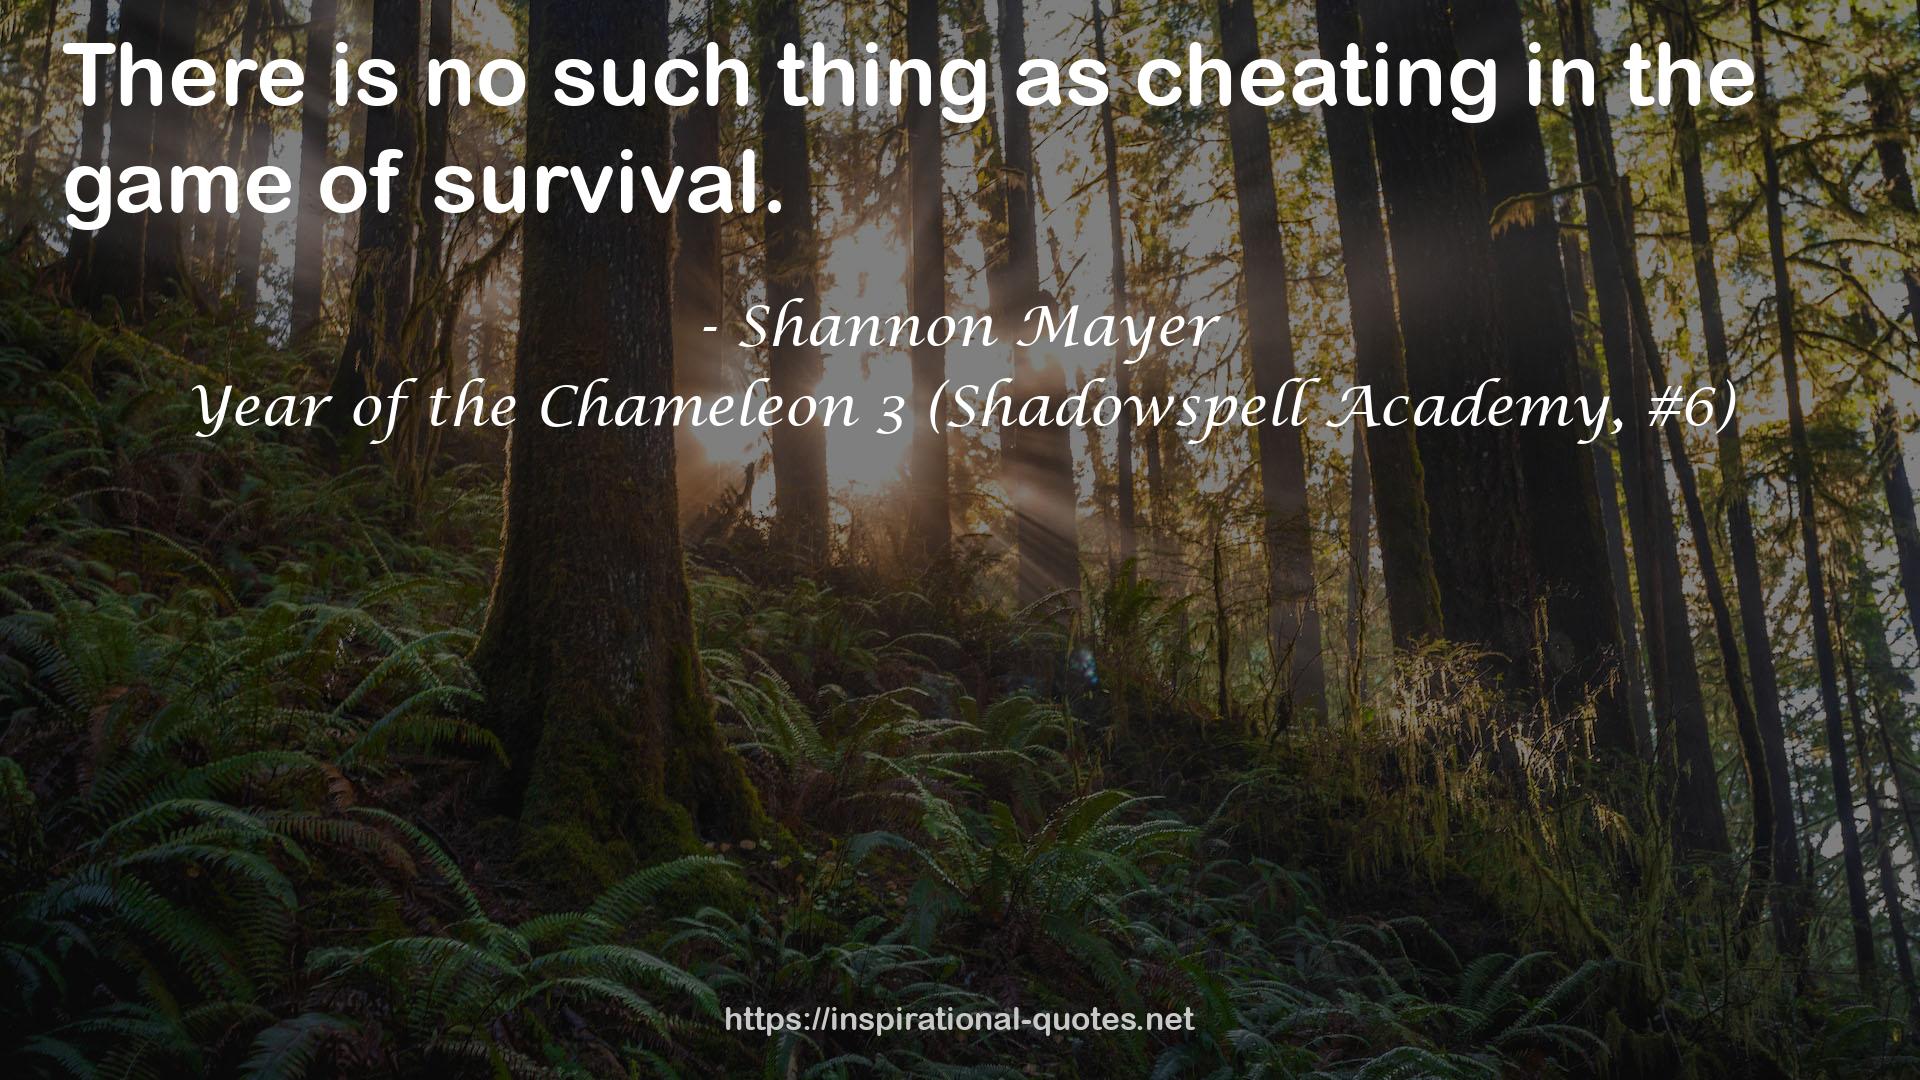 Year of the Chameleon 3 (Shadowspell Academy, #6) QUOTES